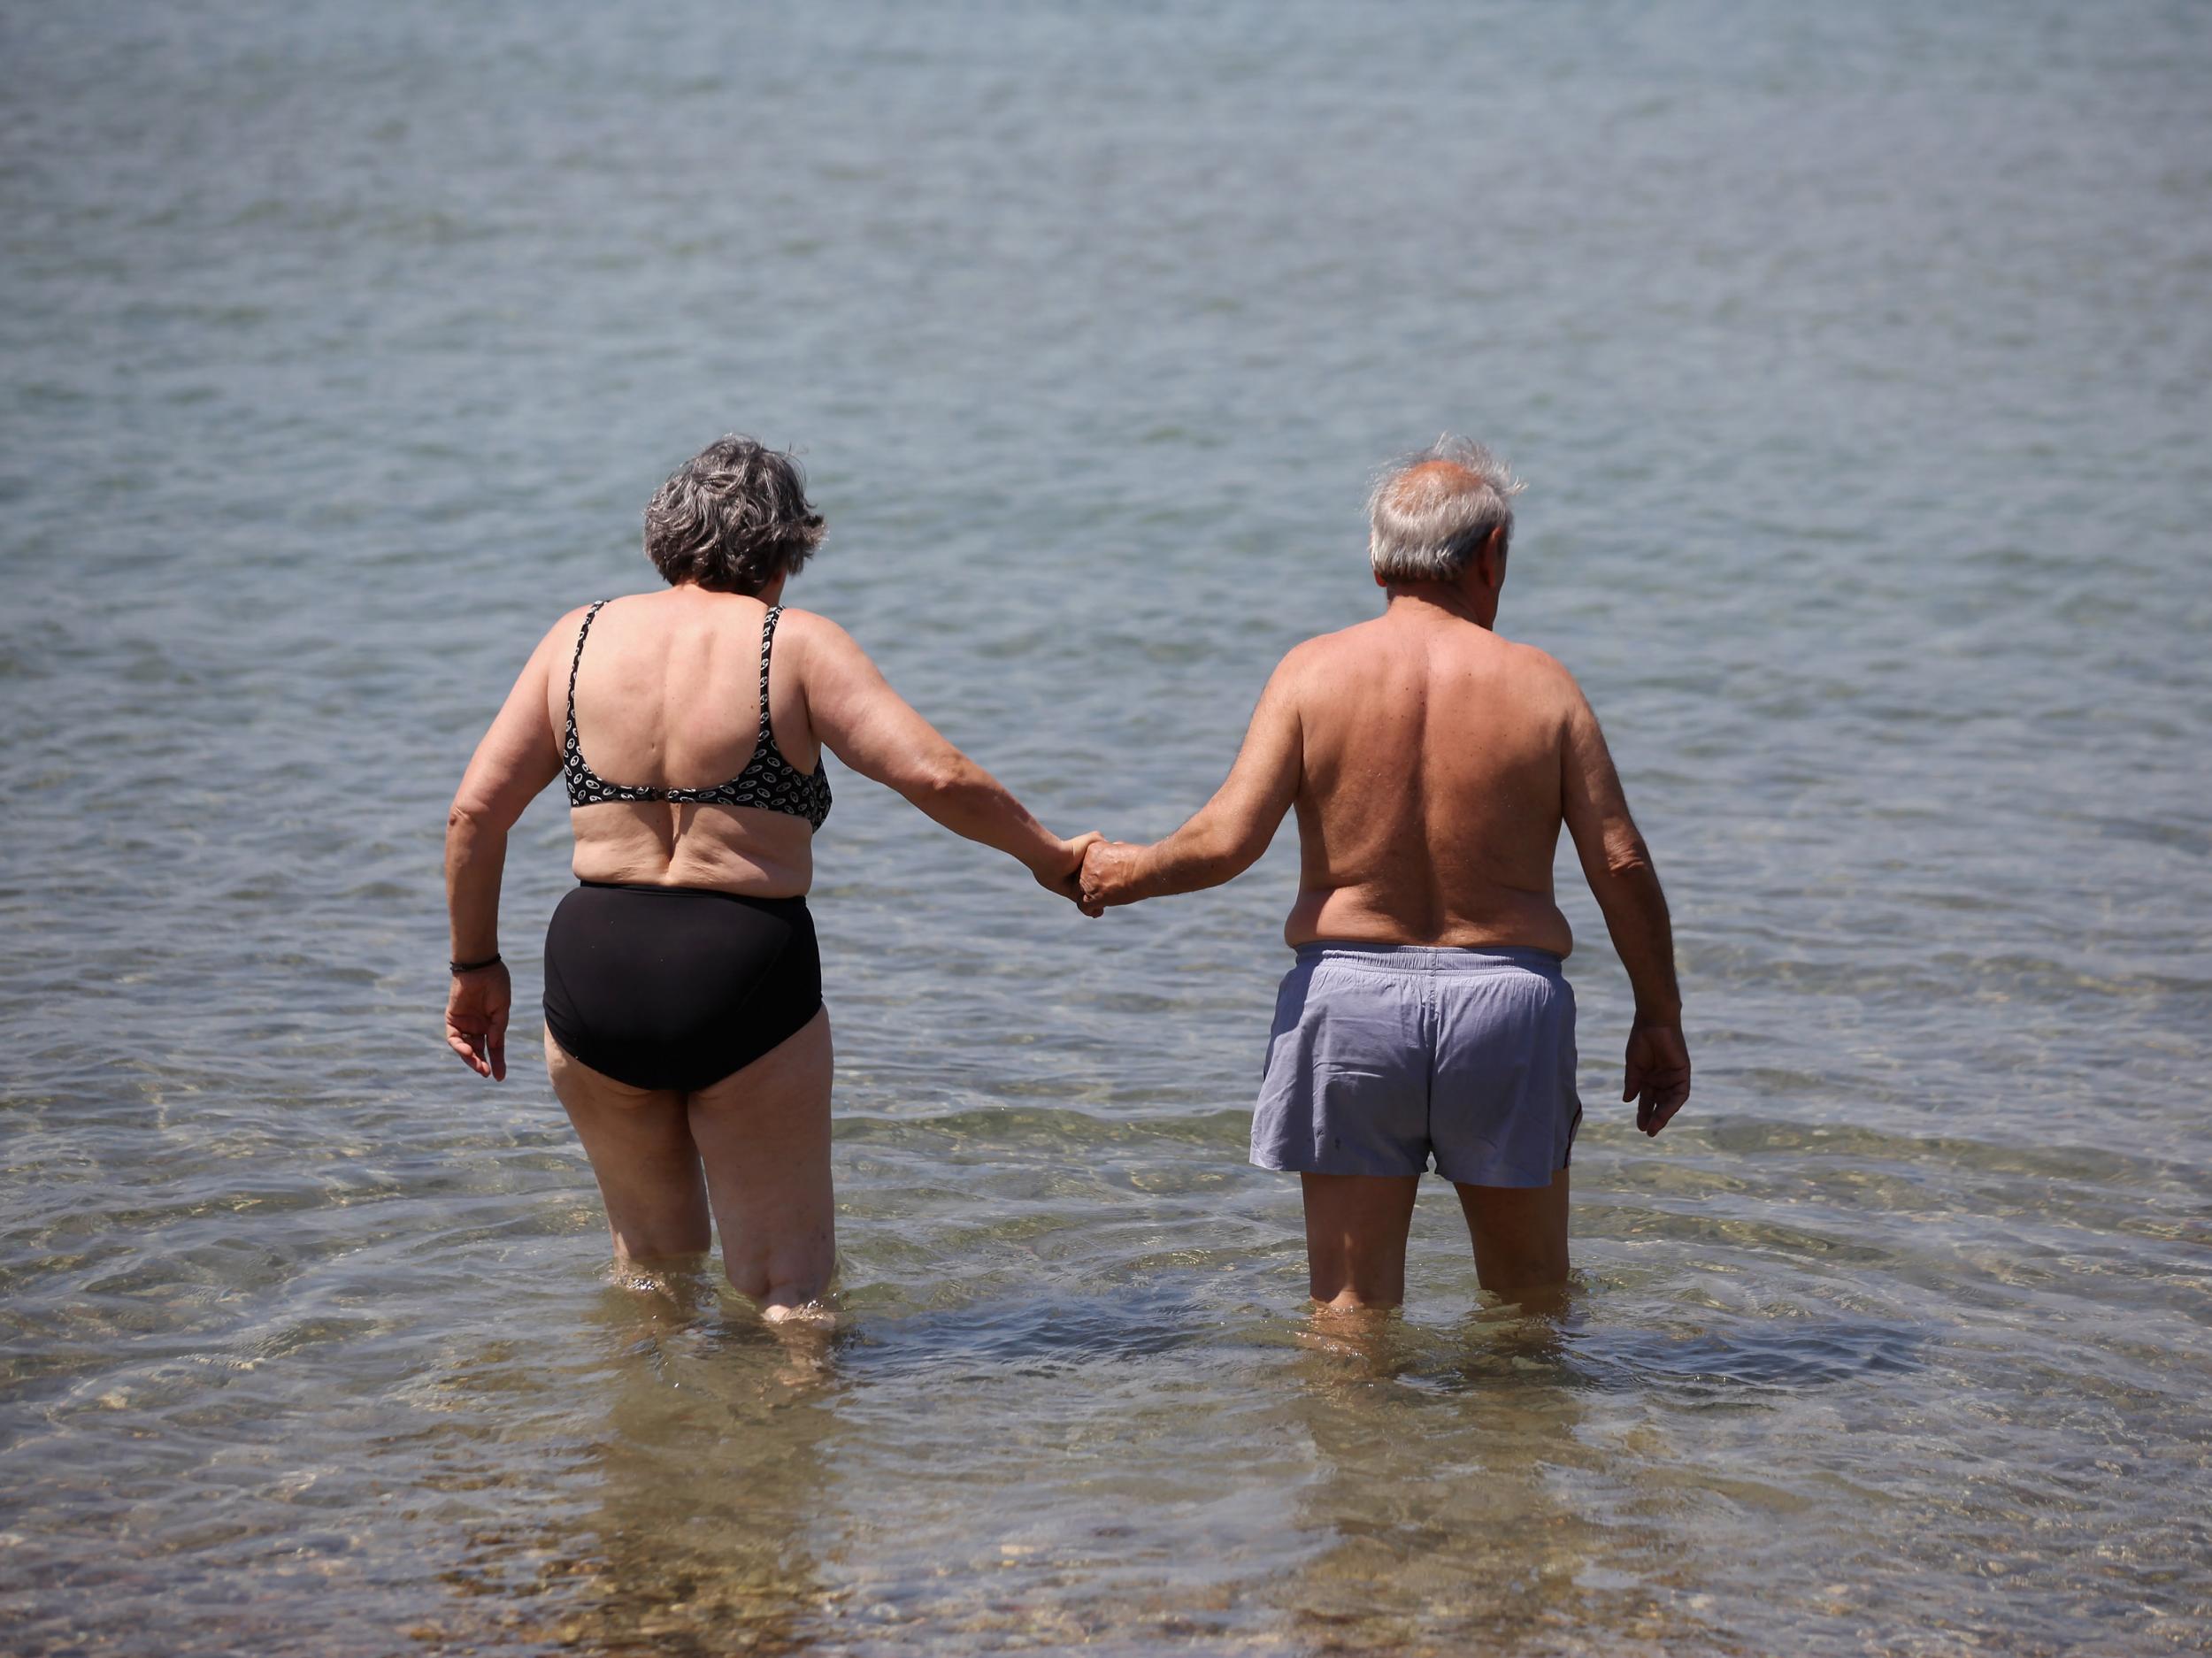 Holding hands leaves you more confident of being loved by your partner